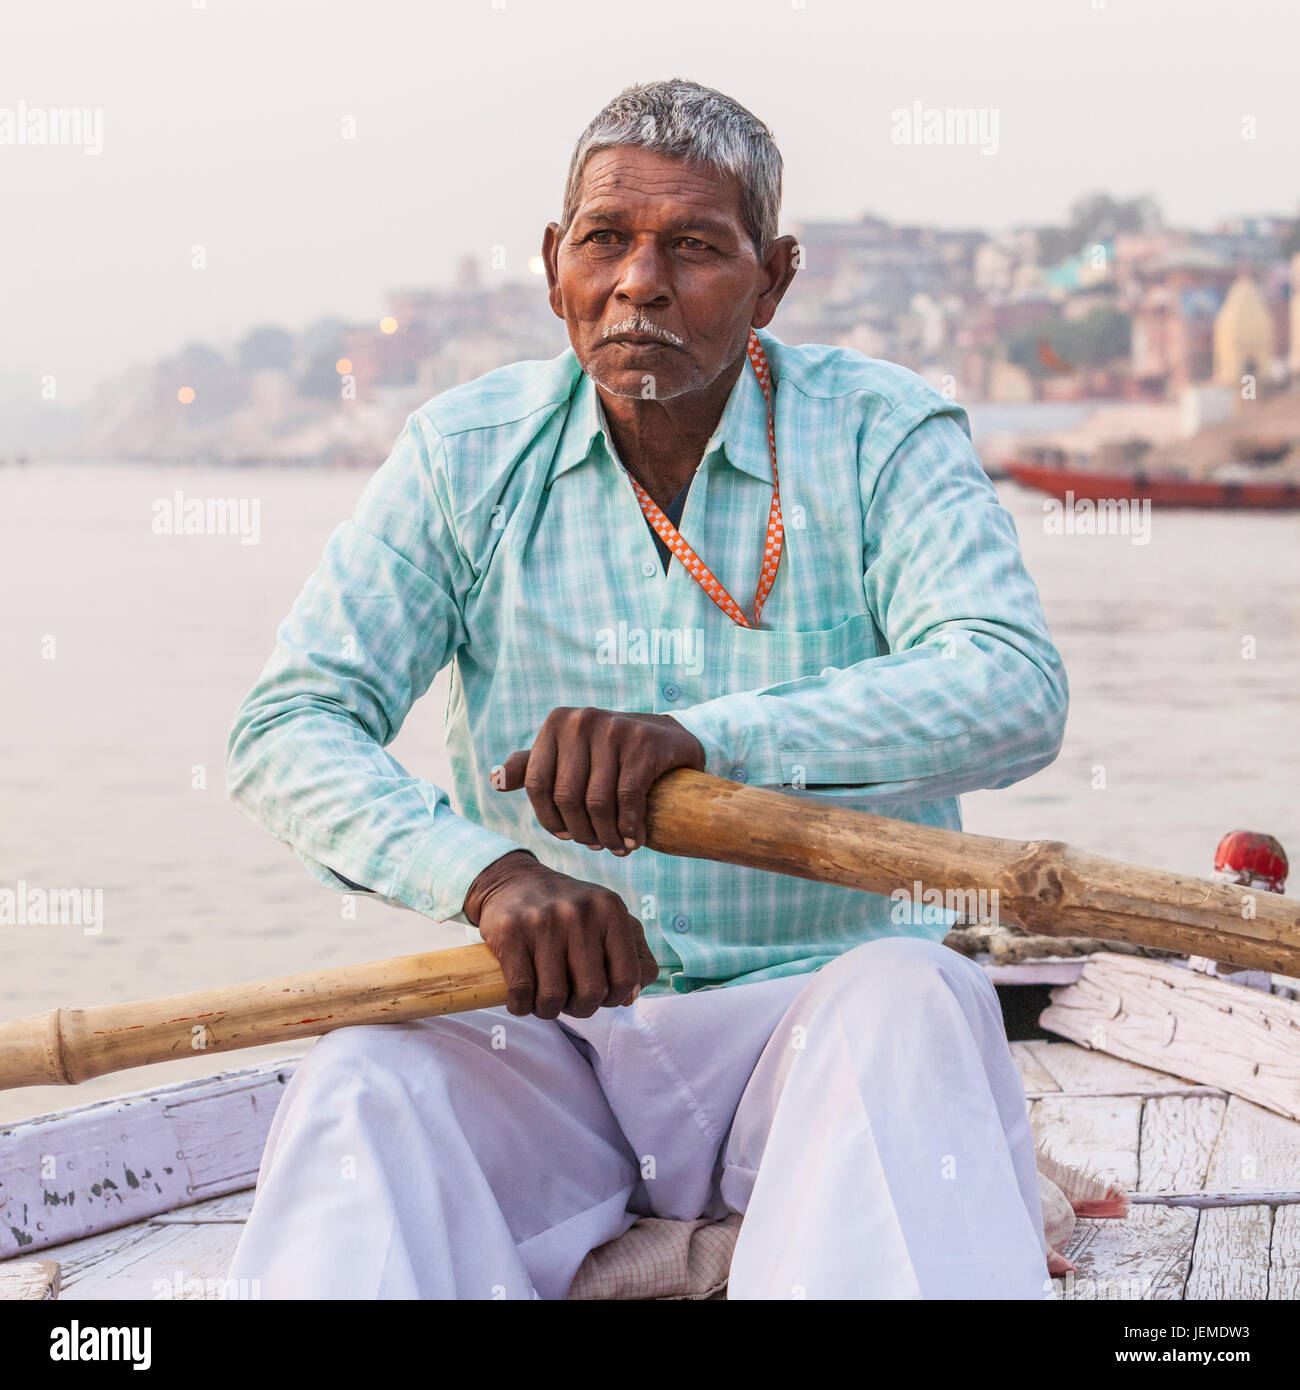 A Indian man rowing a boat for tours on the Ganges river, Varanasi, India. Stock Photo